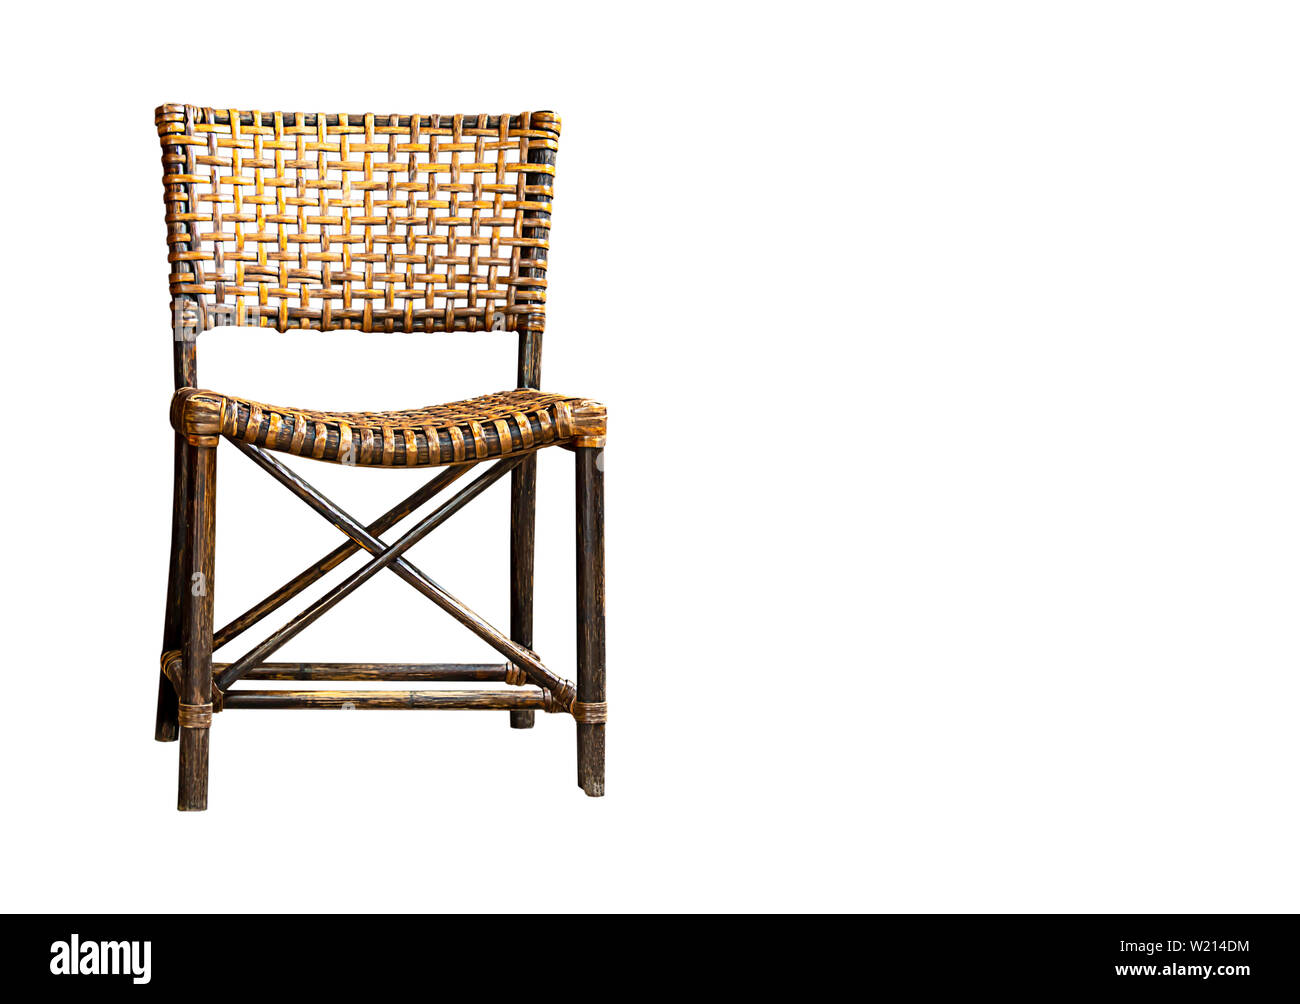 Isolated Old Rattan wood chairs on a white background with clipping path. Stock Photo